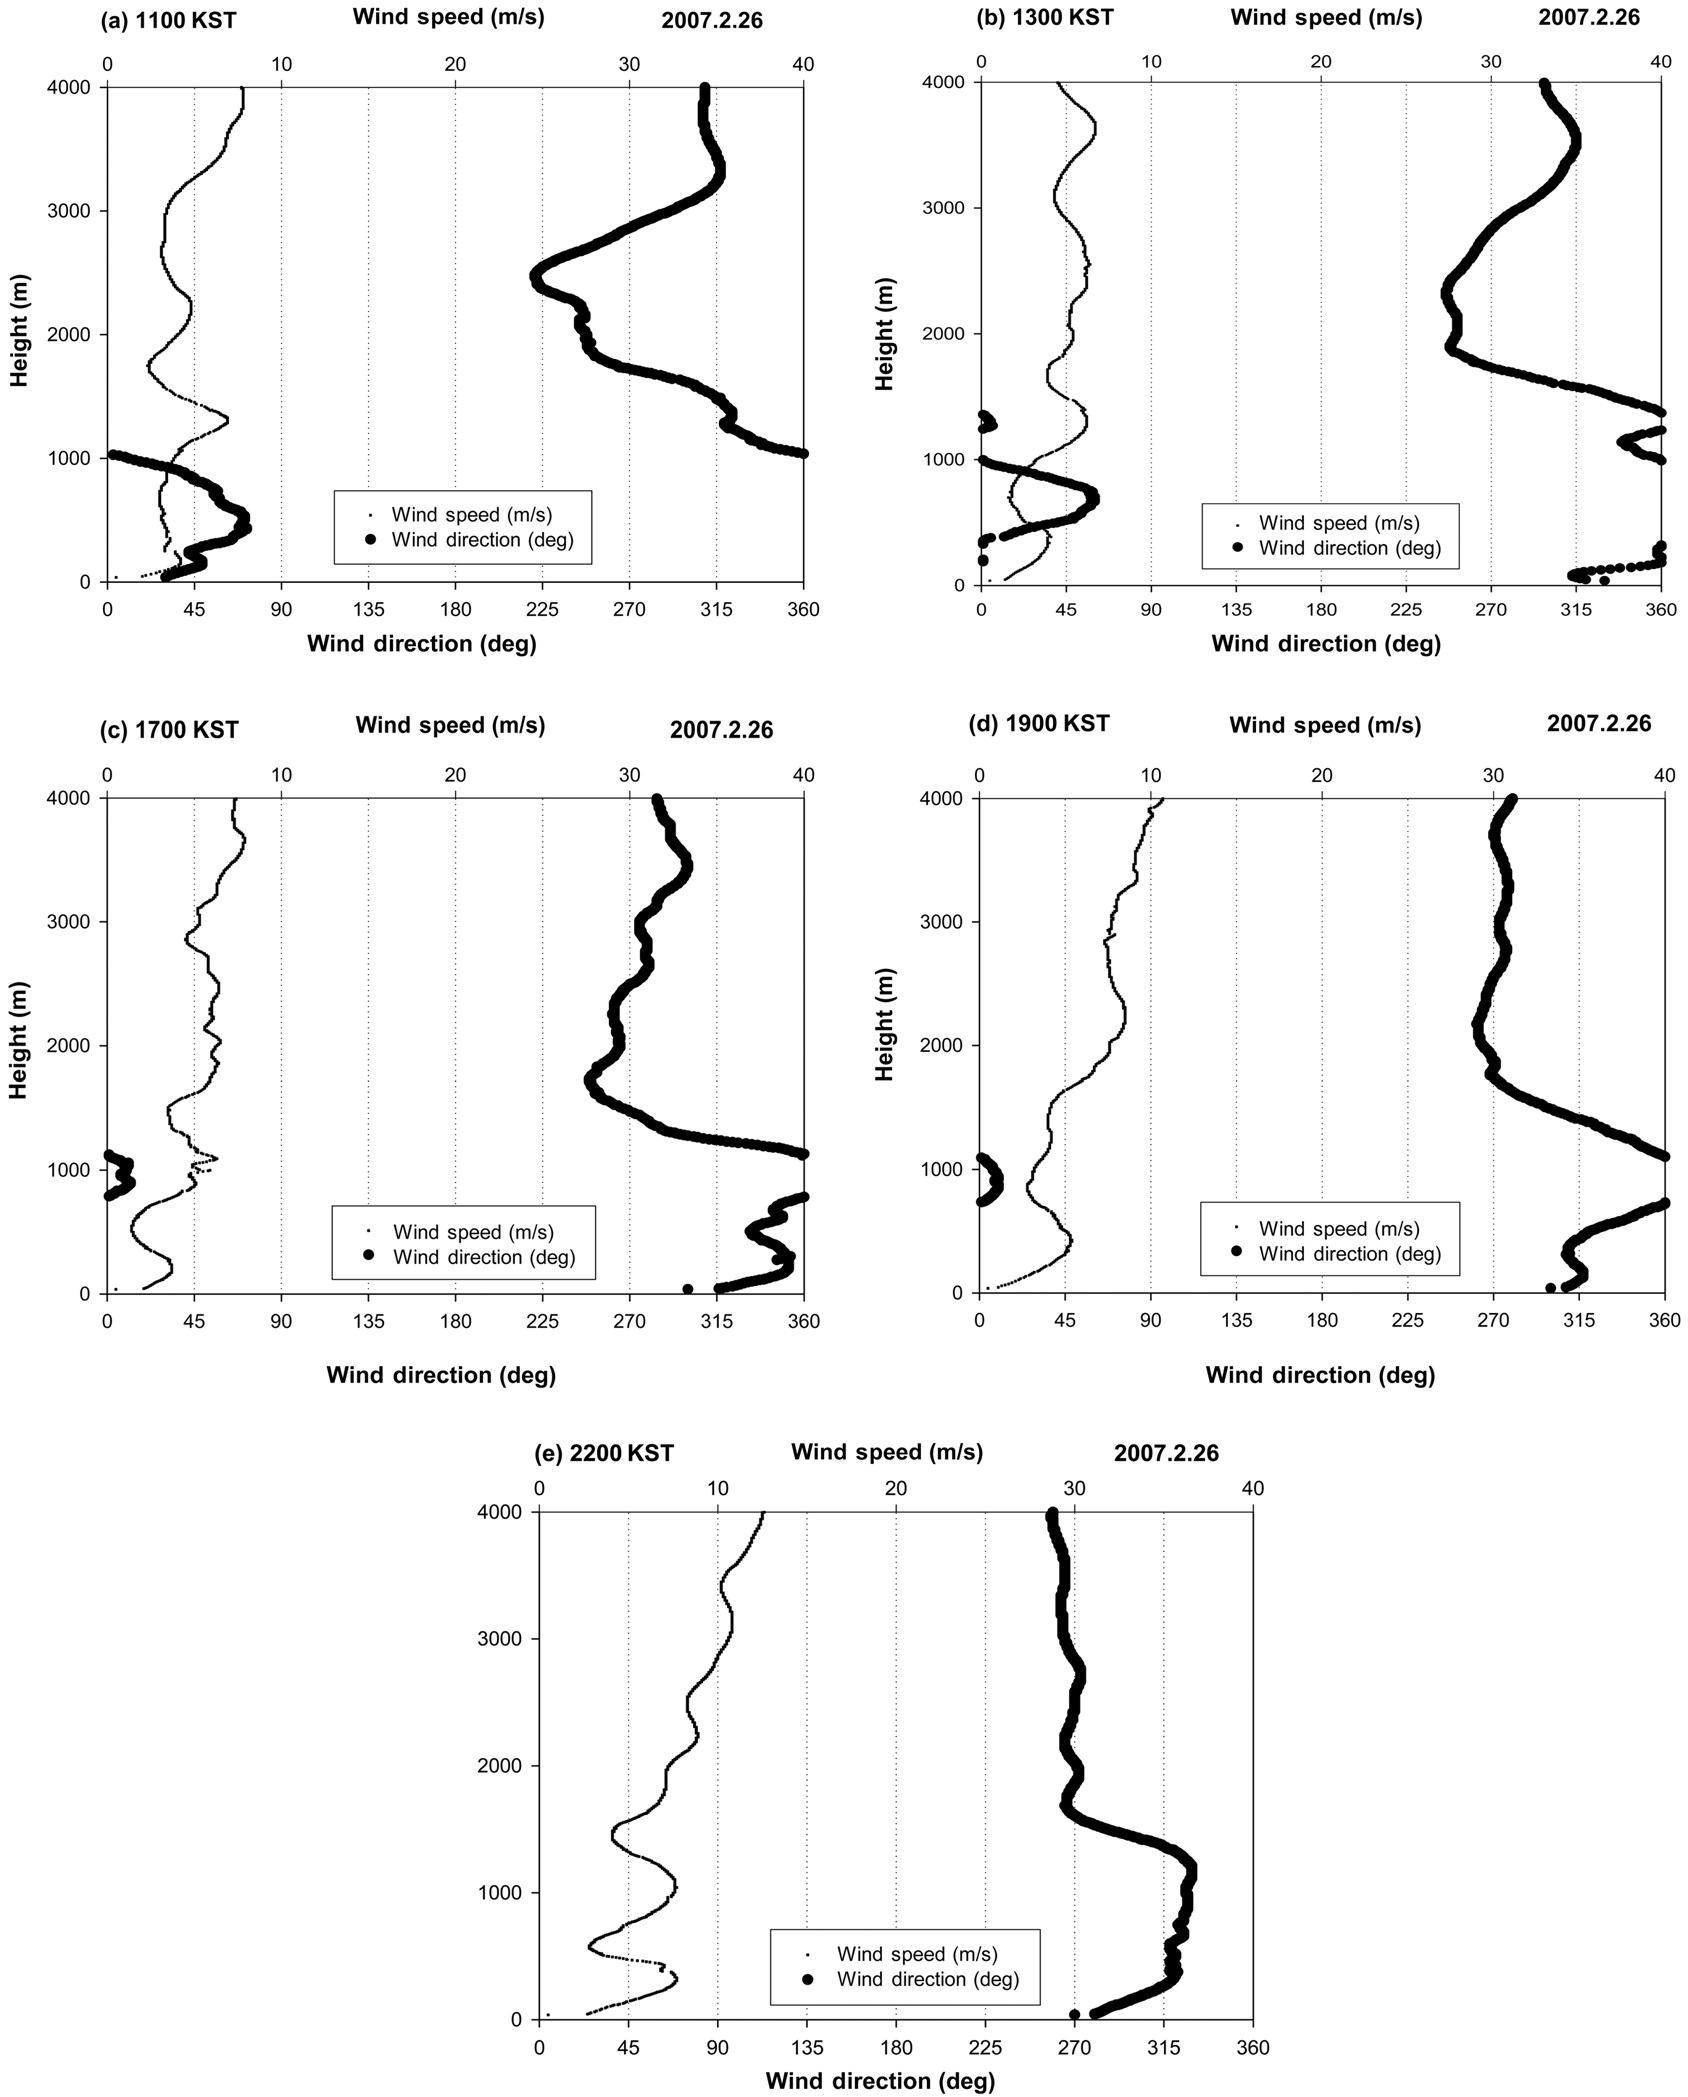 Vertical profiles of wind vector and wind speed at each observation time (2007.2.26).